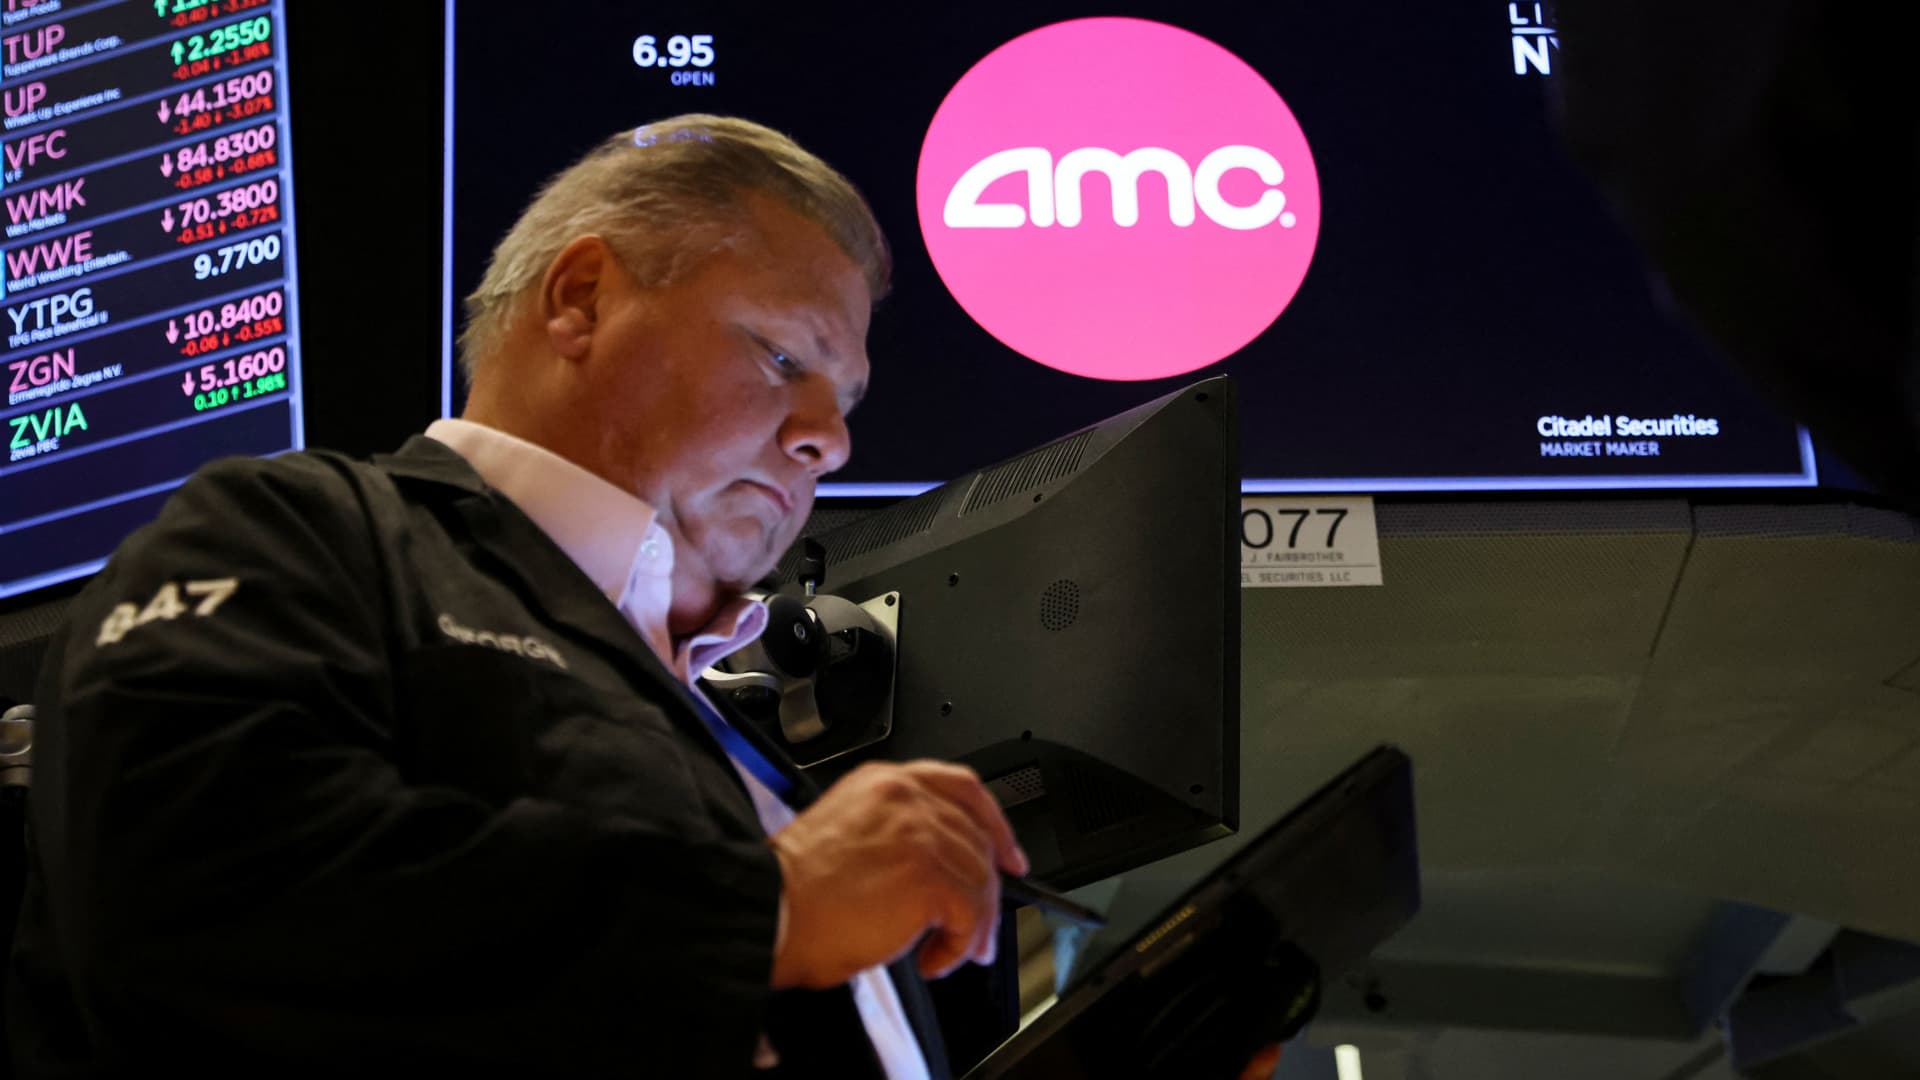 AMC shares fall as it announces plan to sell additional stock